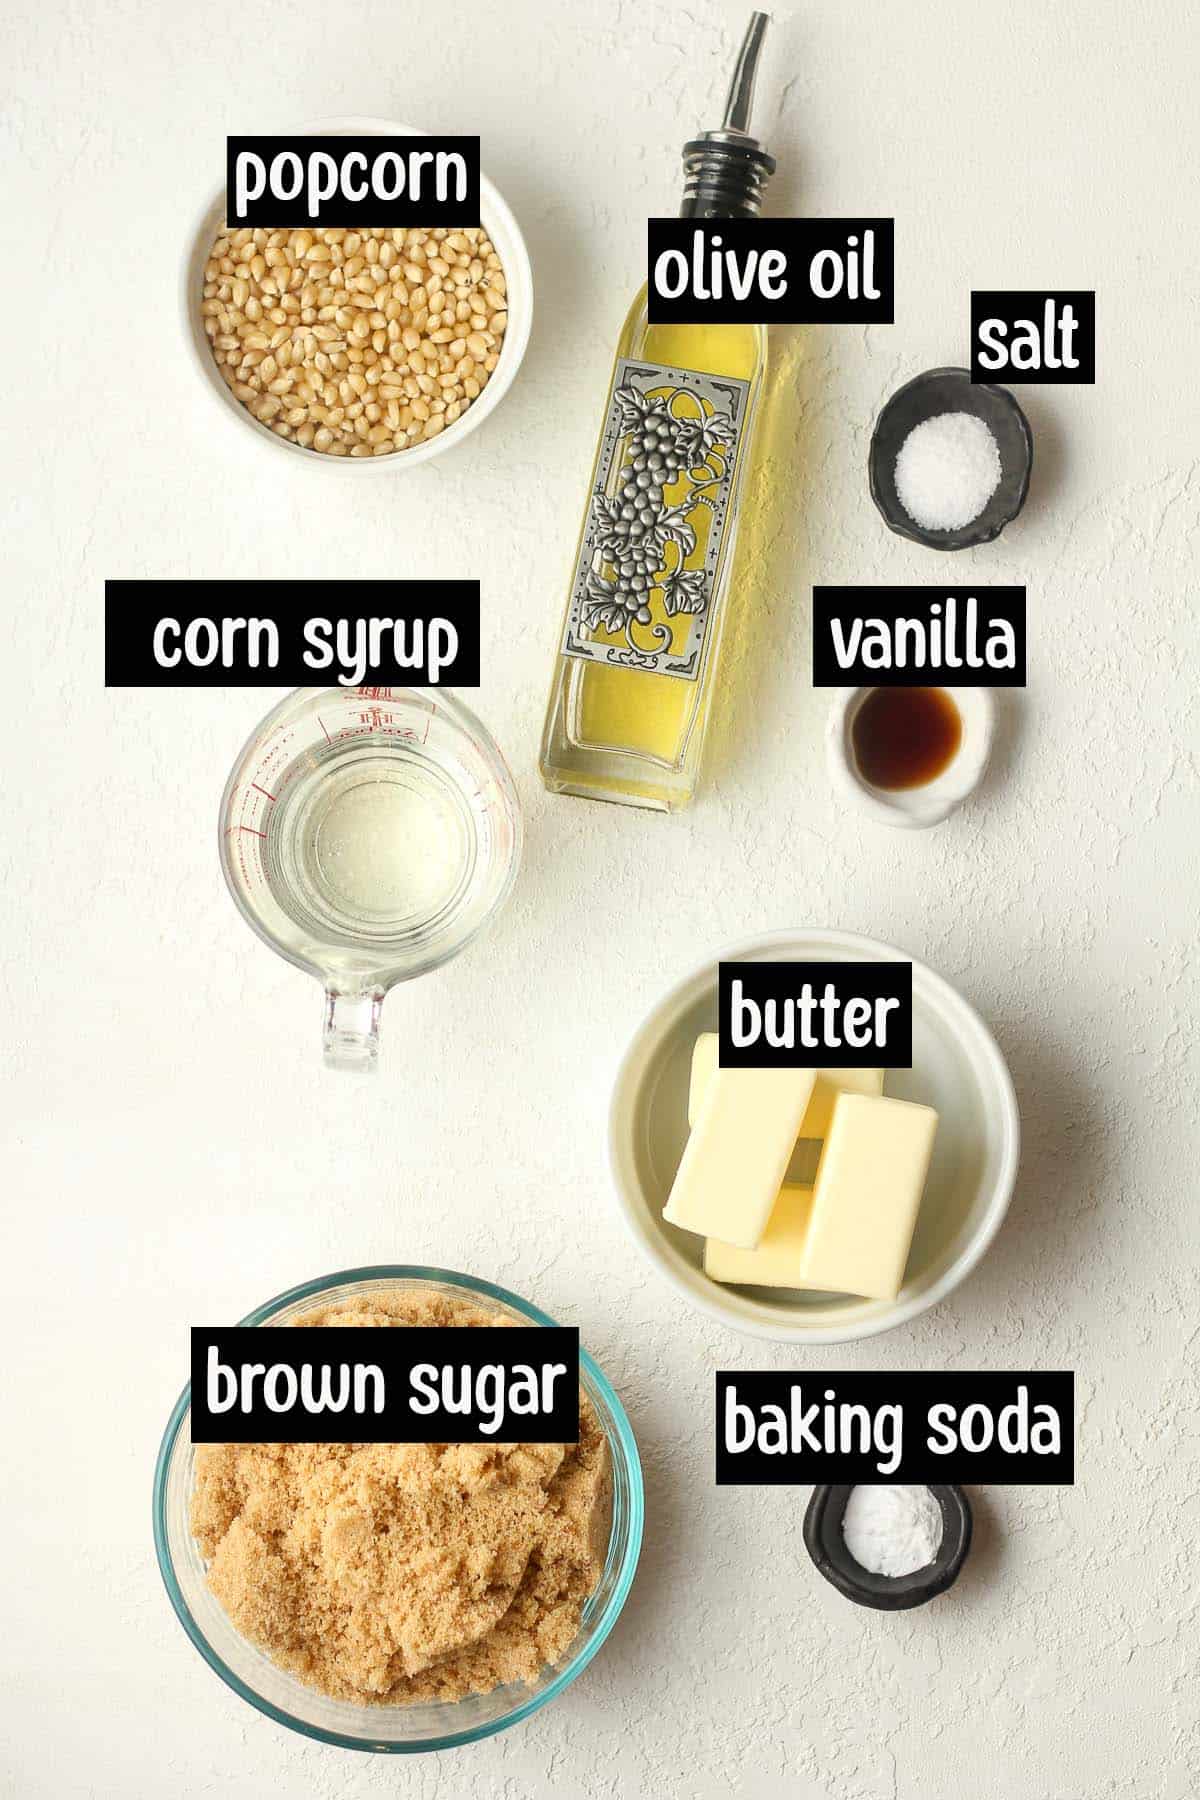 The labeled ingredients for the caramel popcorn.